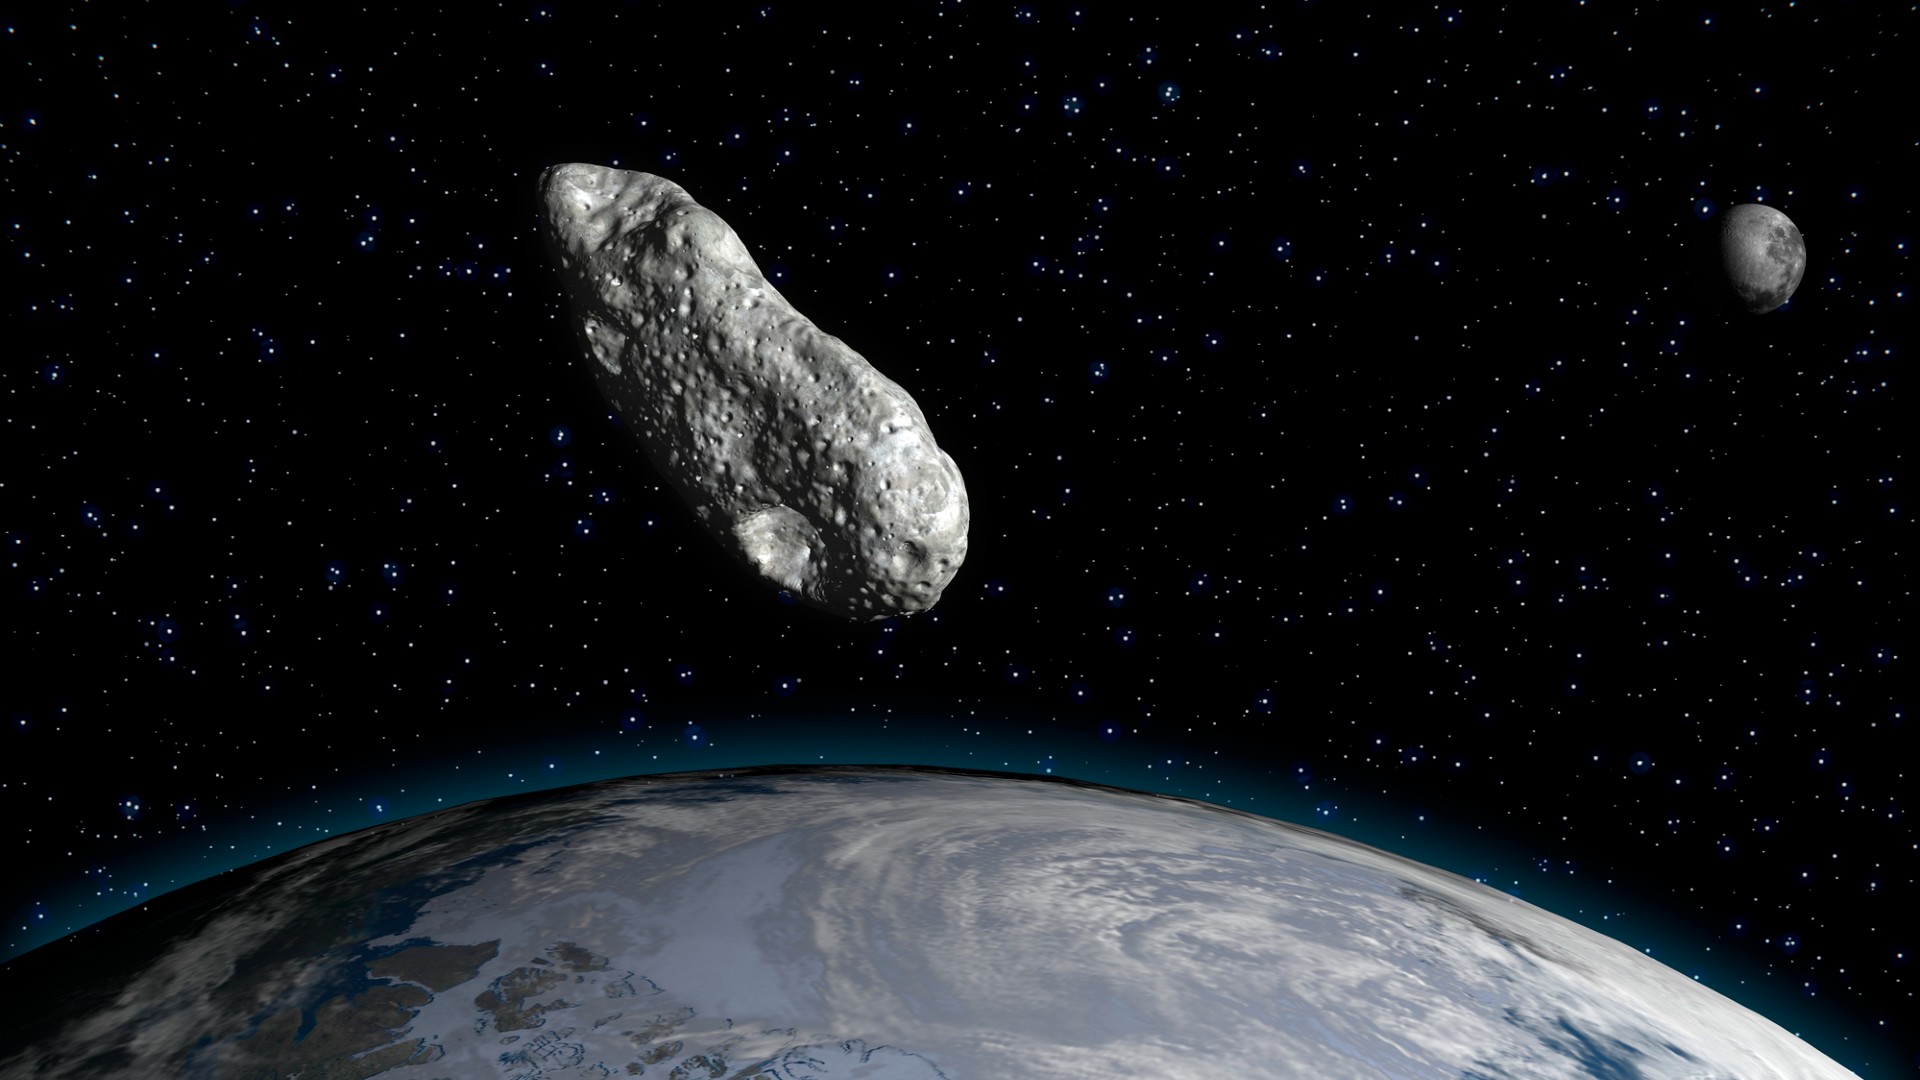 An illustration of a meteorite in space heading towards Earth.